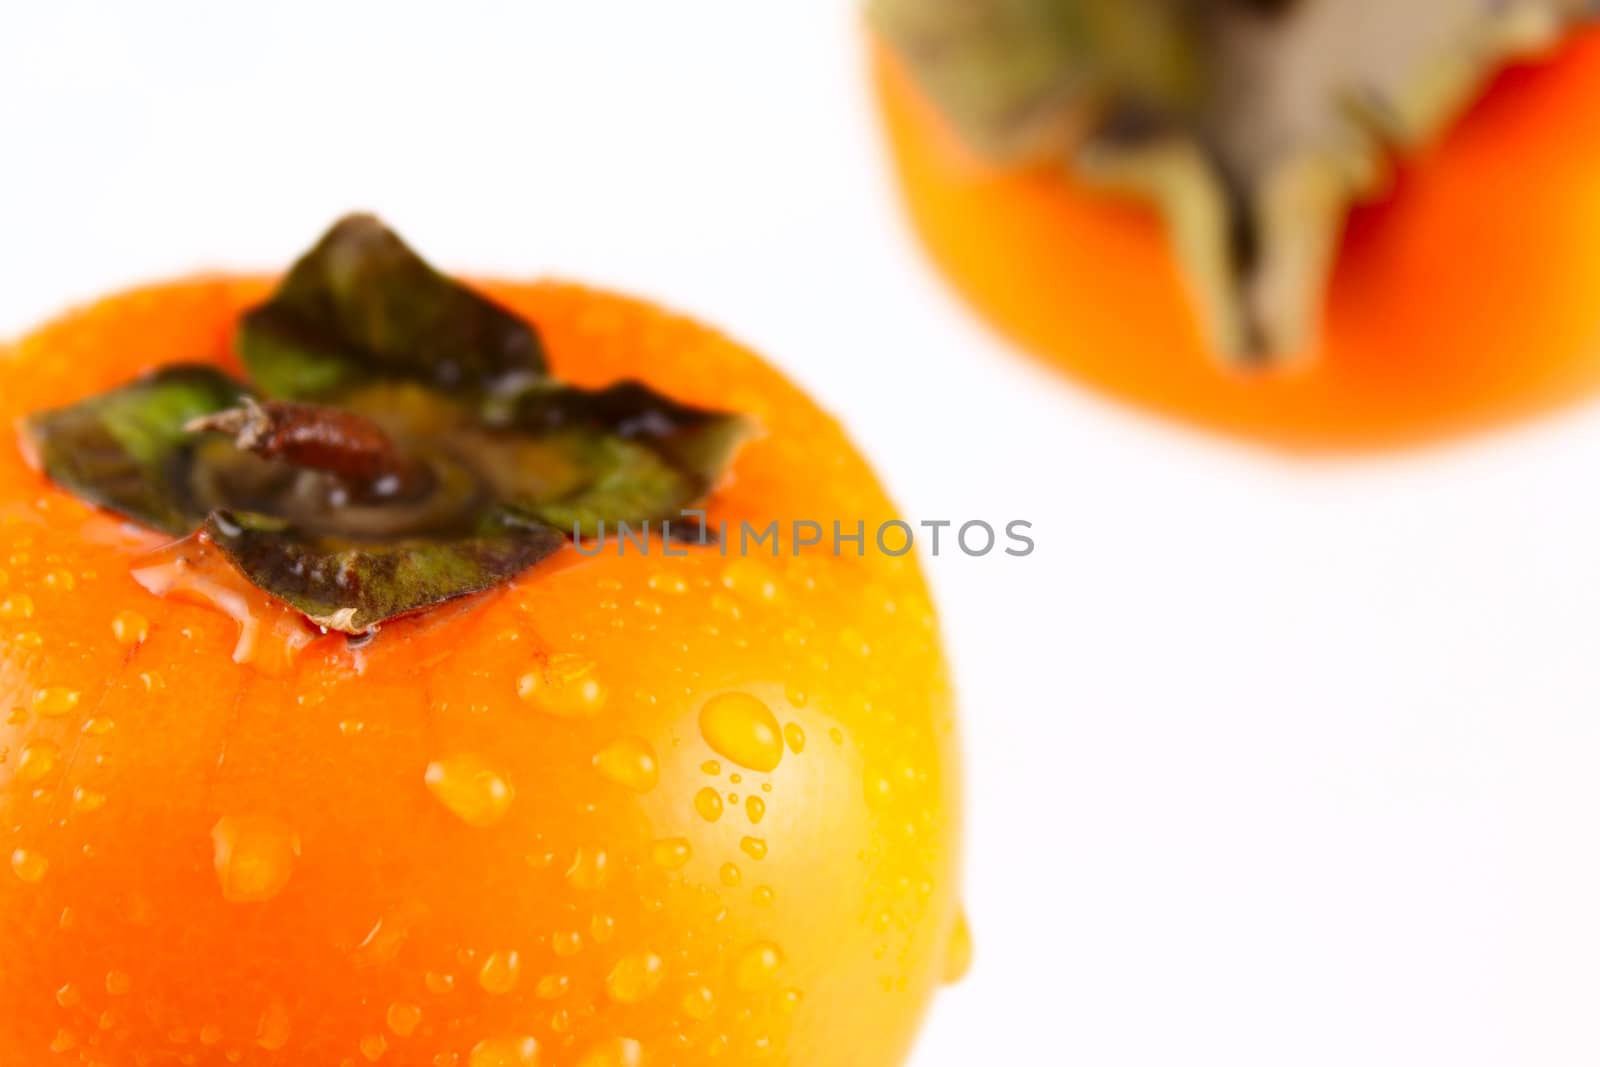 Persimmon removed close up by Incarnatus